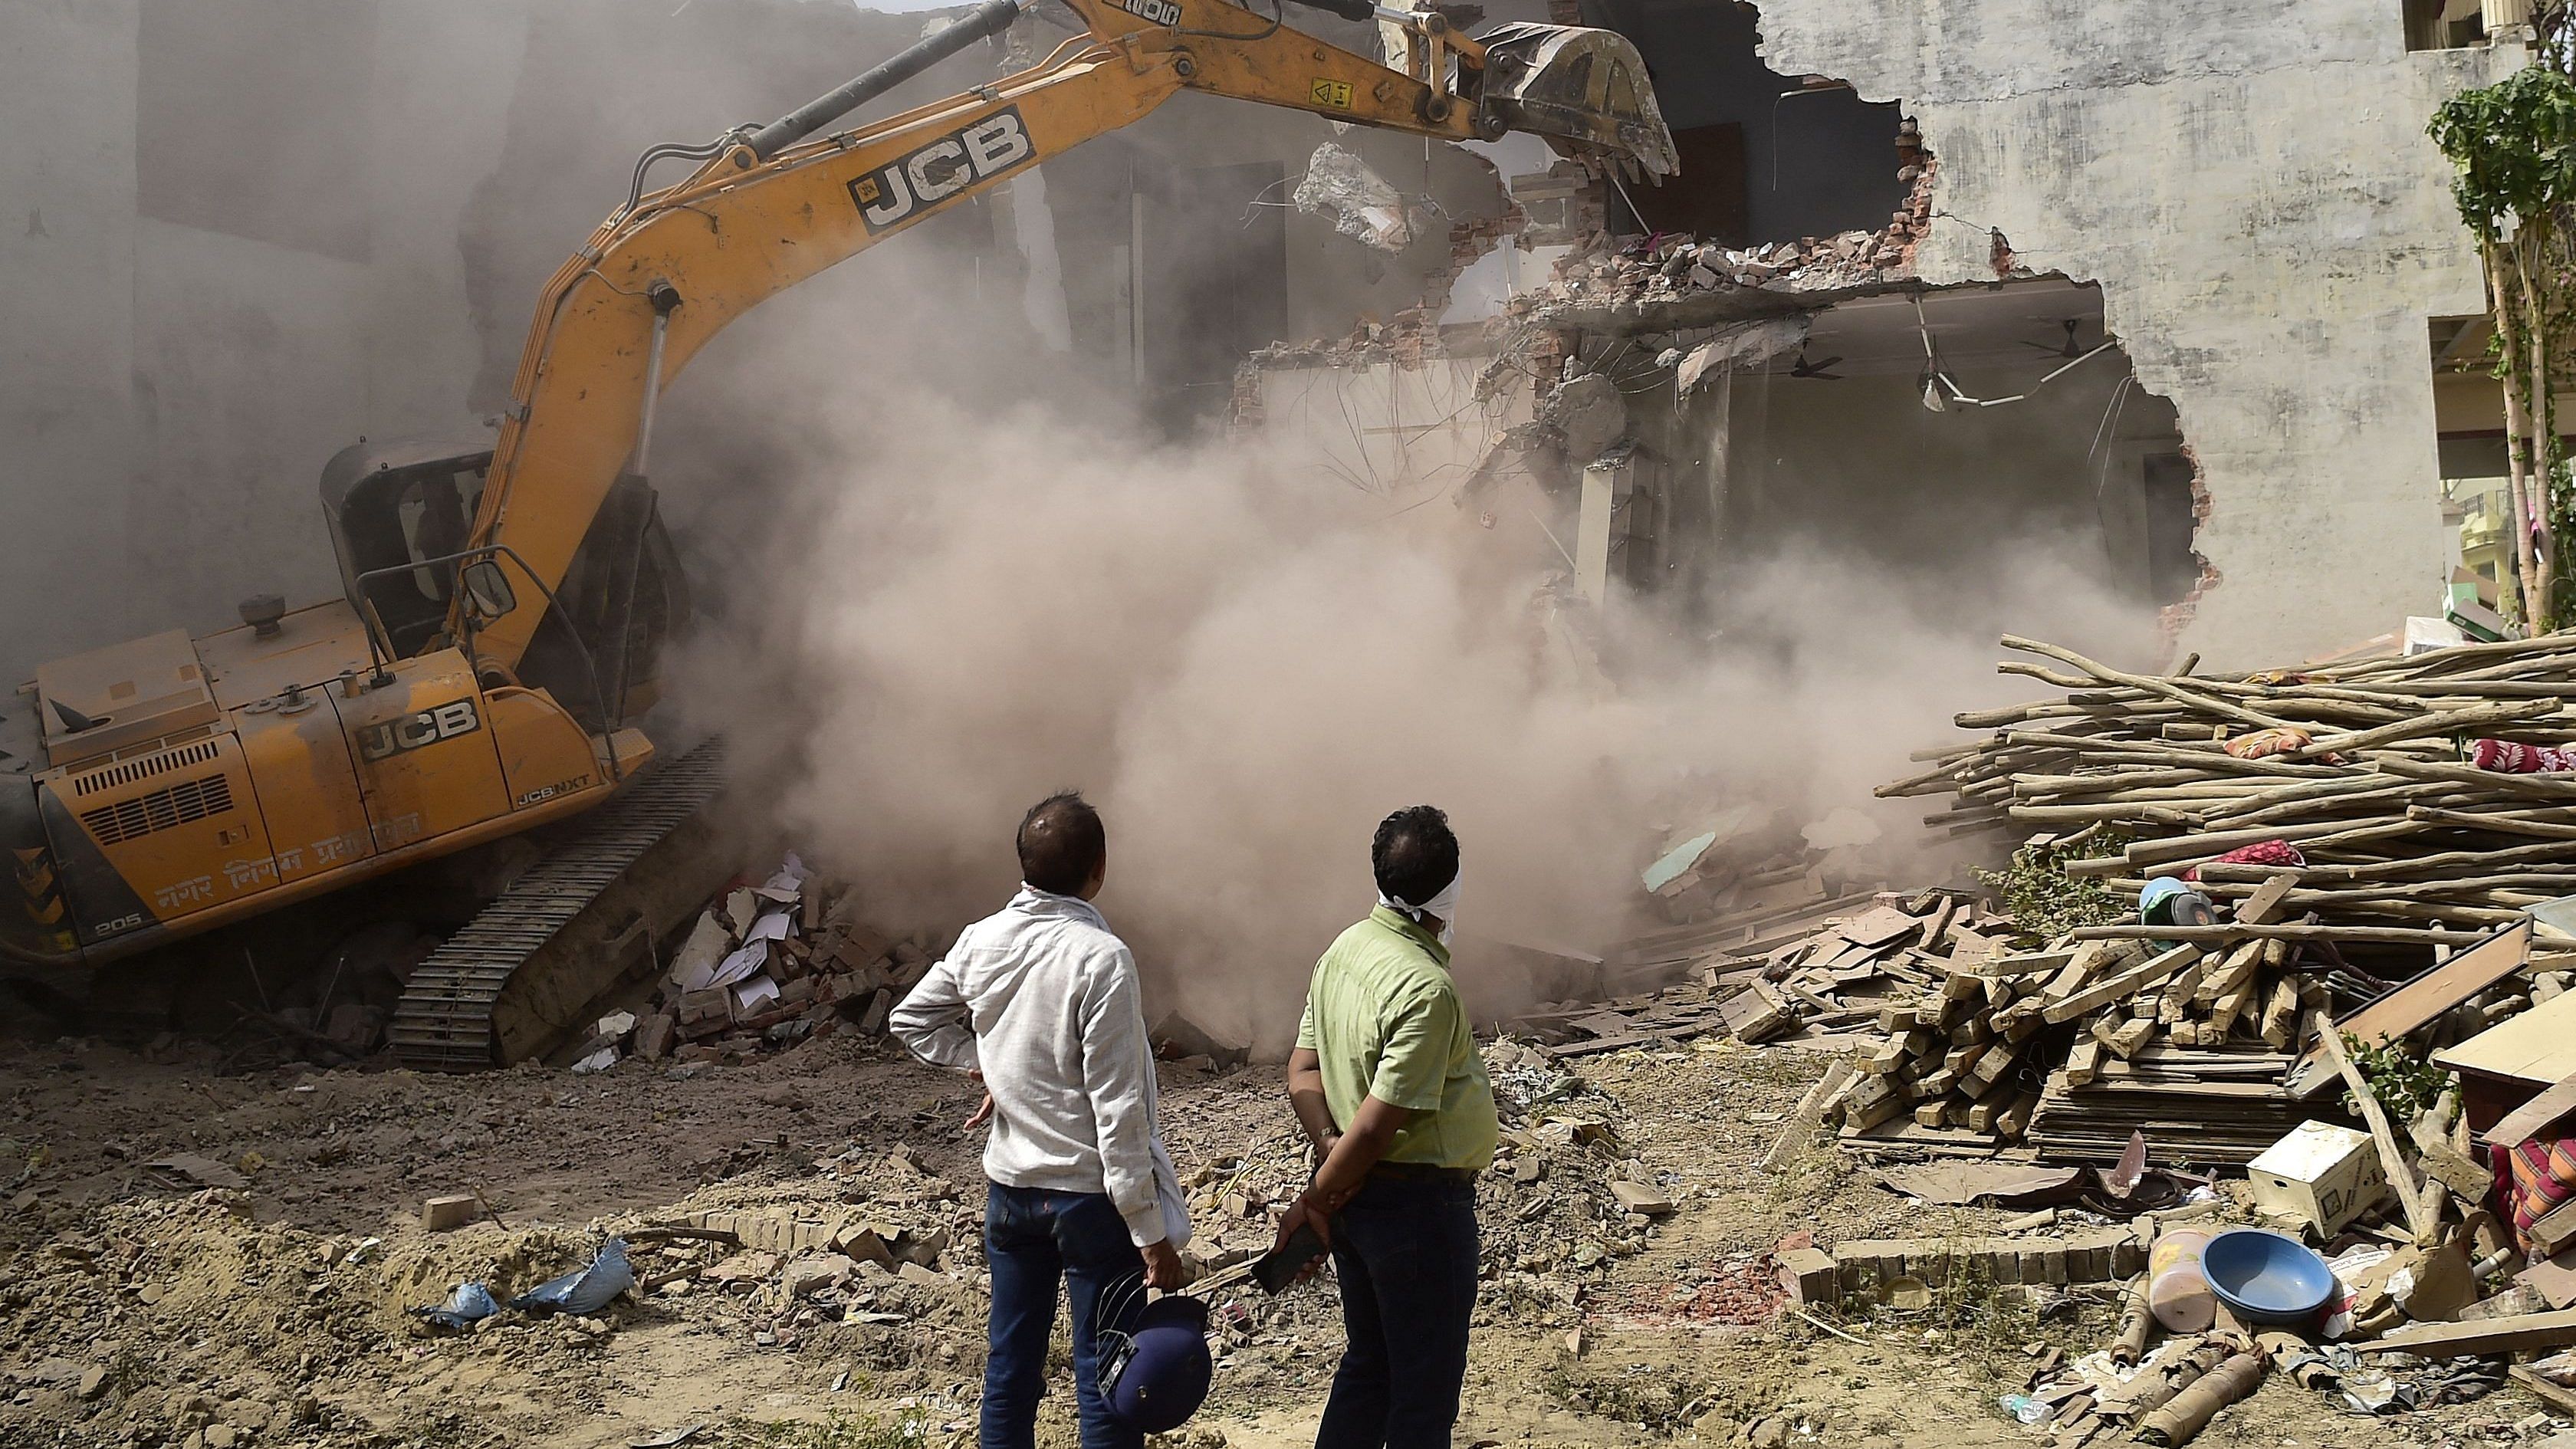 A bulldozer is being used to demolish the illegal structures of the residence of Javed Ahmed, a local leader who was allegedly involved in the recent violent protests against Bharatiya Janata Party (BJP) former spokeswoman Nupur Sharma's incendiary remarks about Prophet Mohammed. Credit: AFP Photo